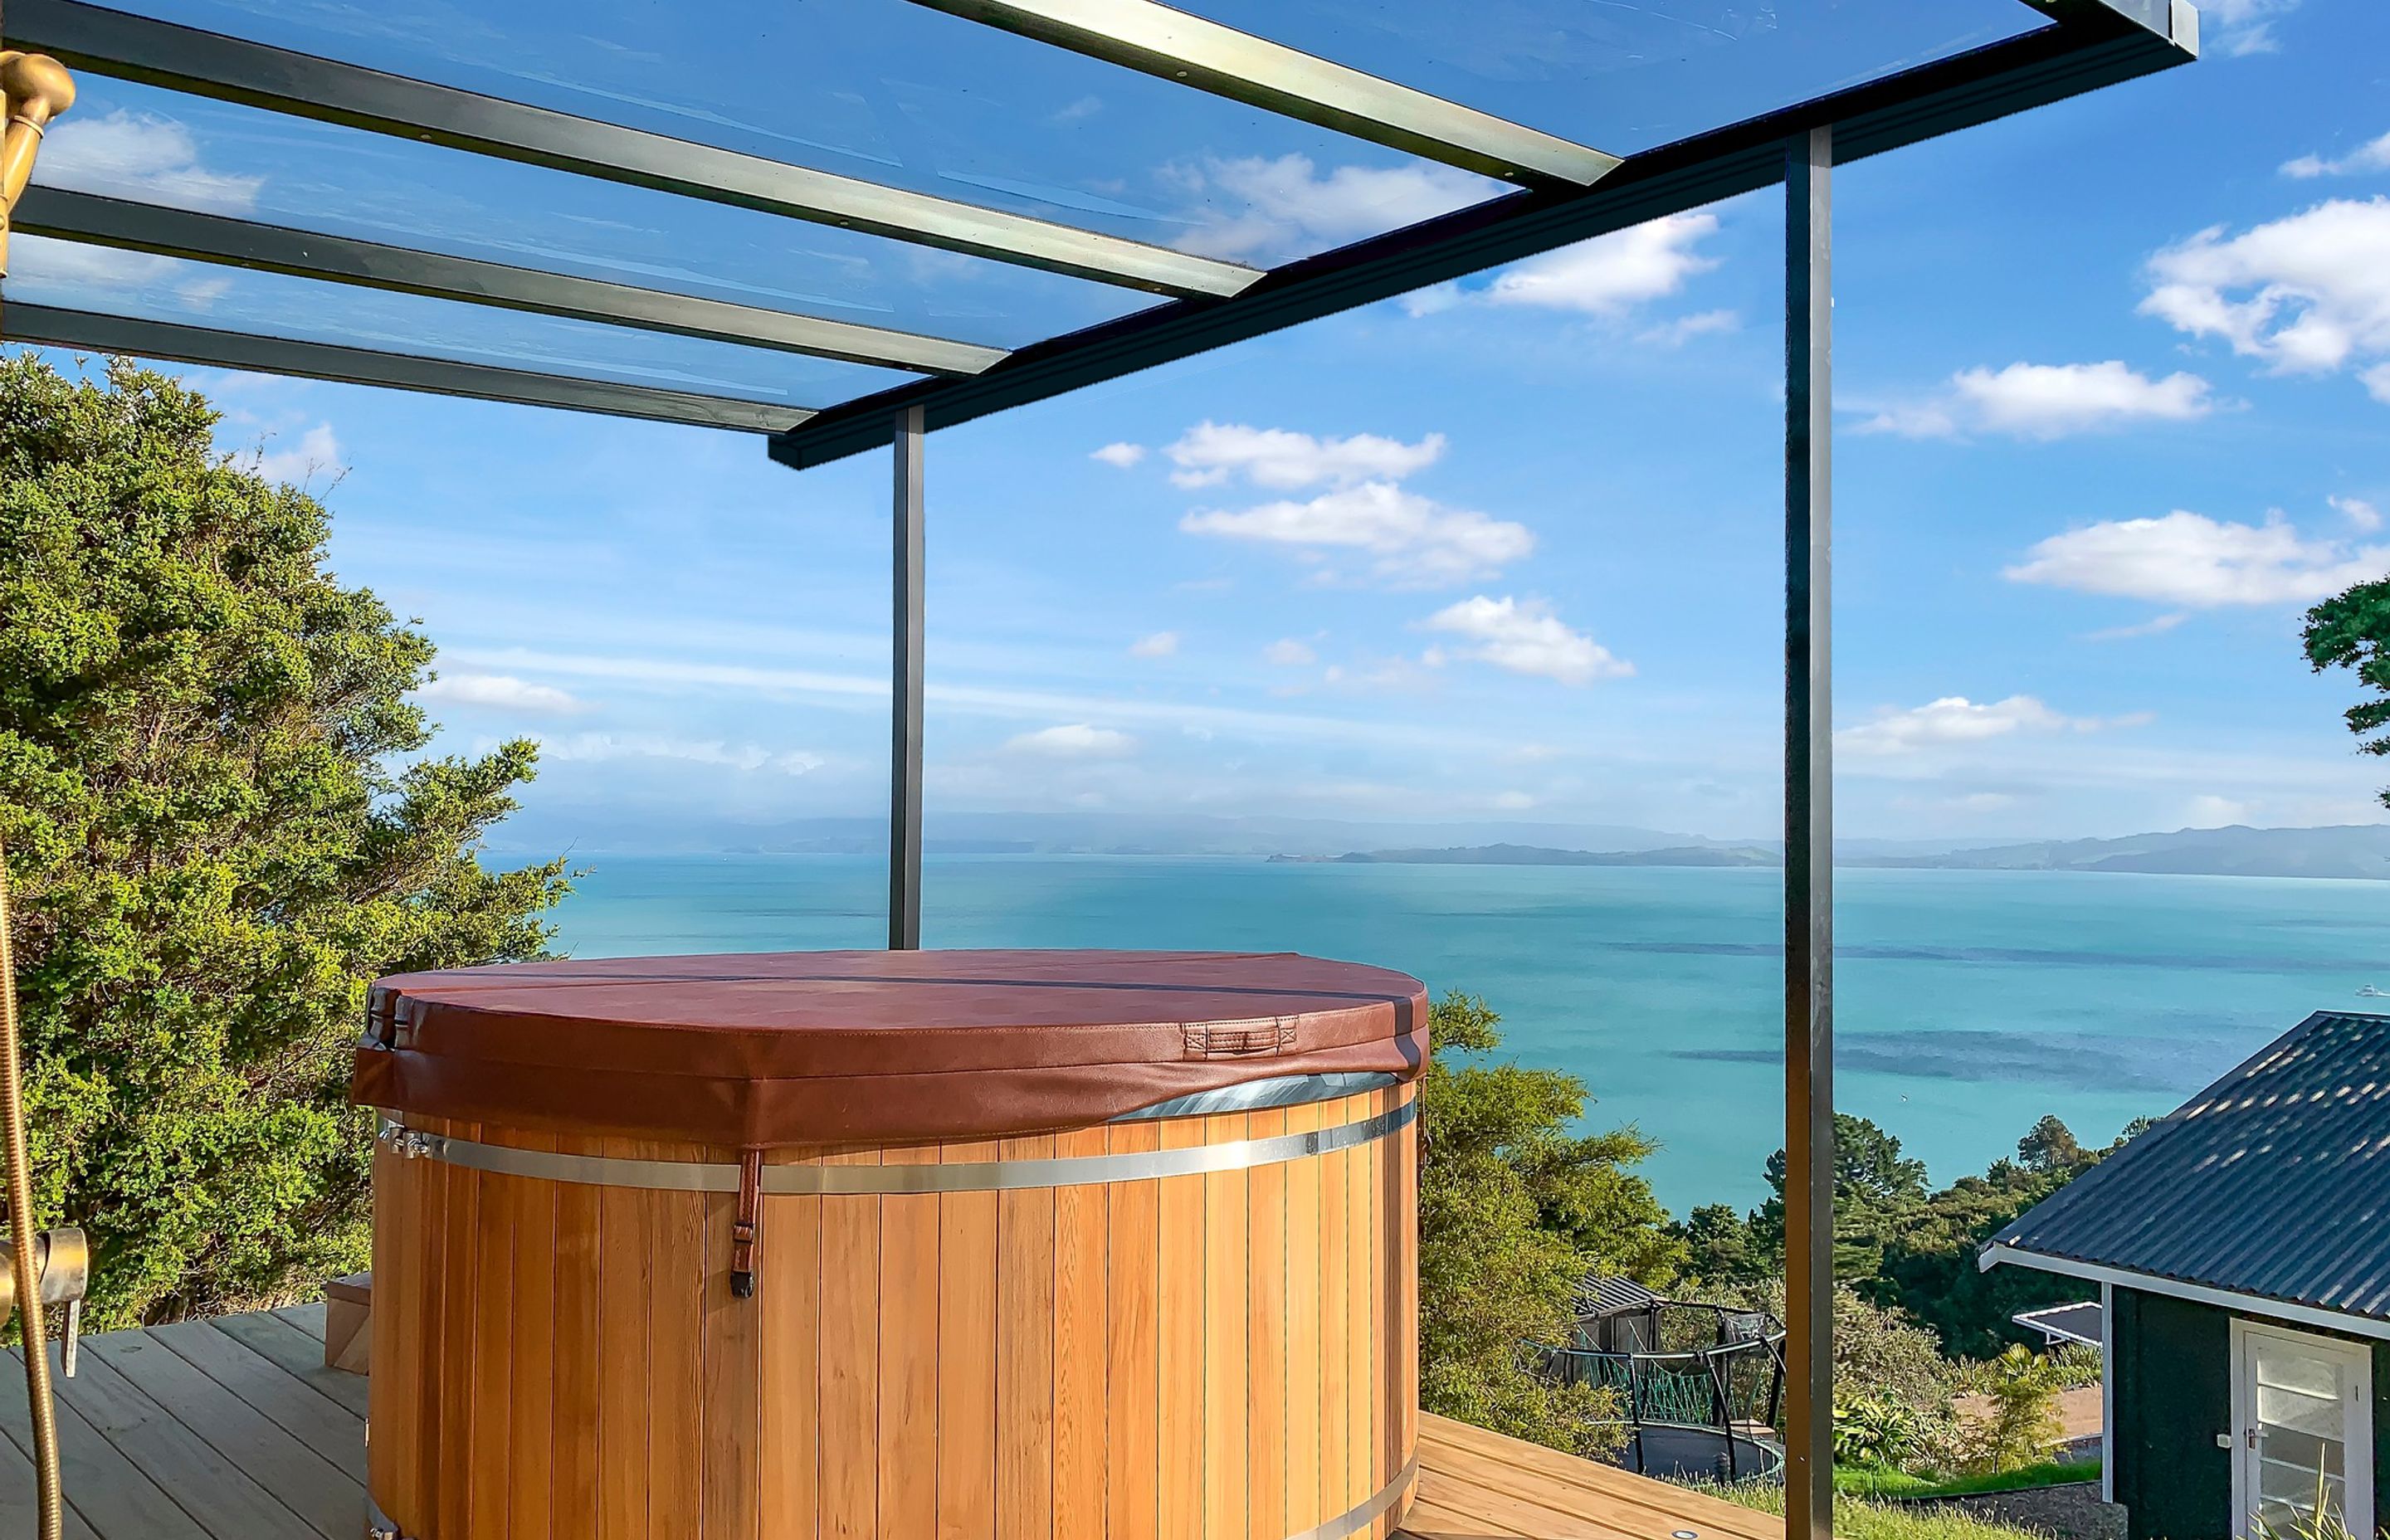 Flexiroof light offers shelter without interrupting the view.